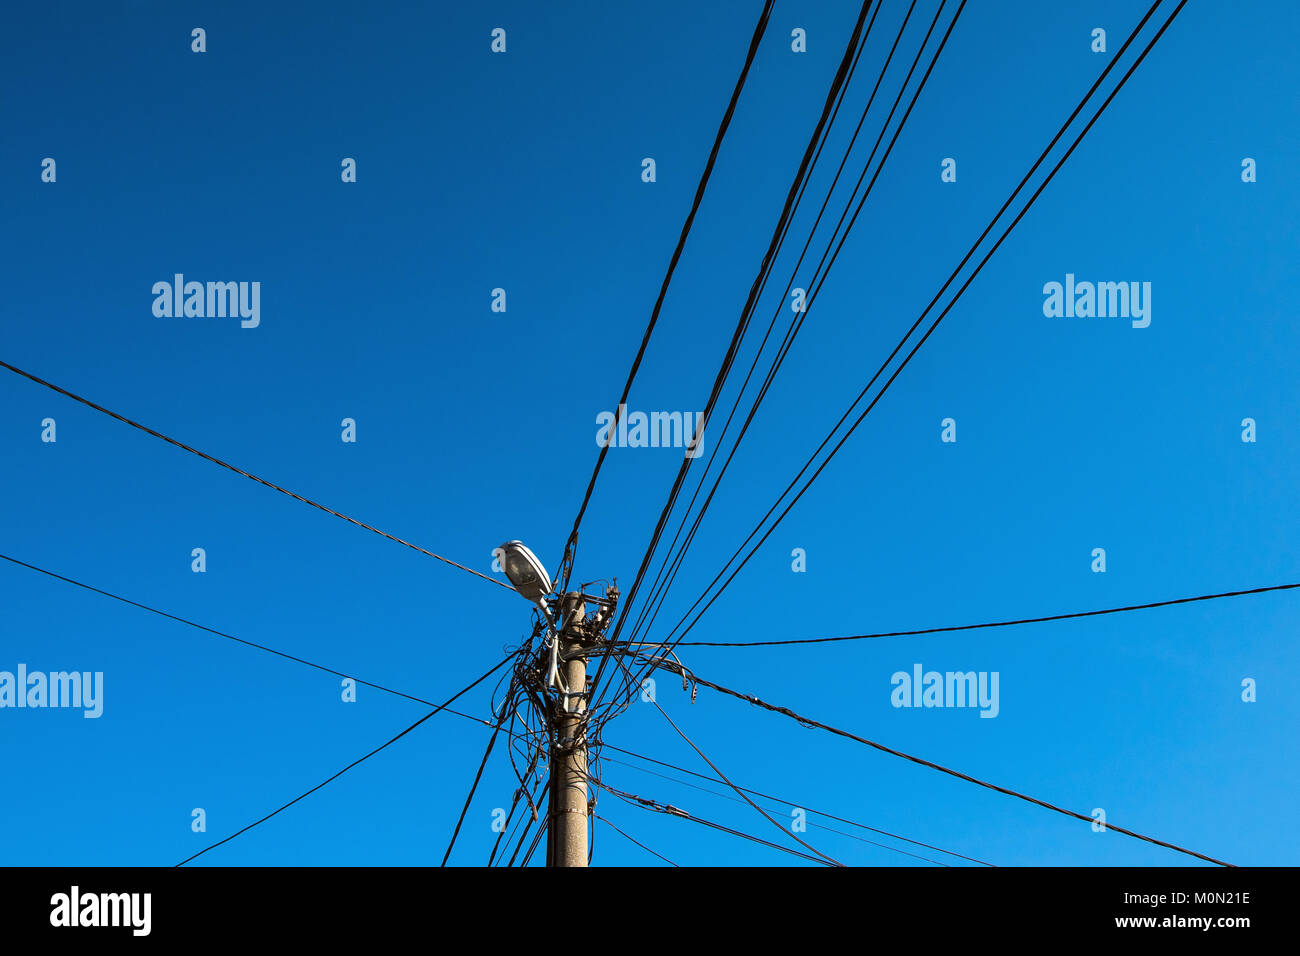 Electricity pole for street light with messy wires Stock Photo